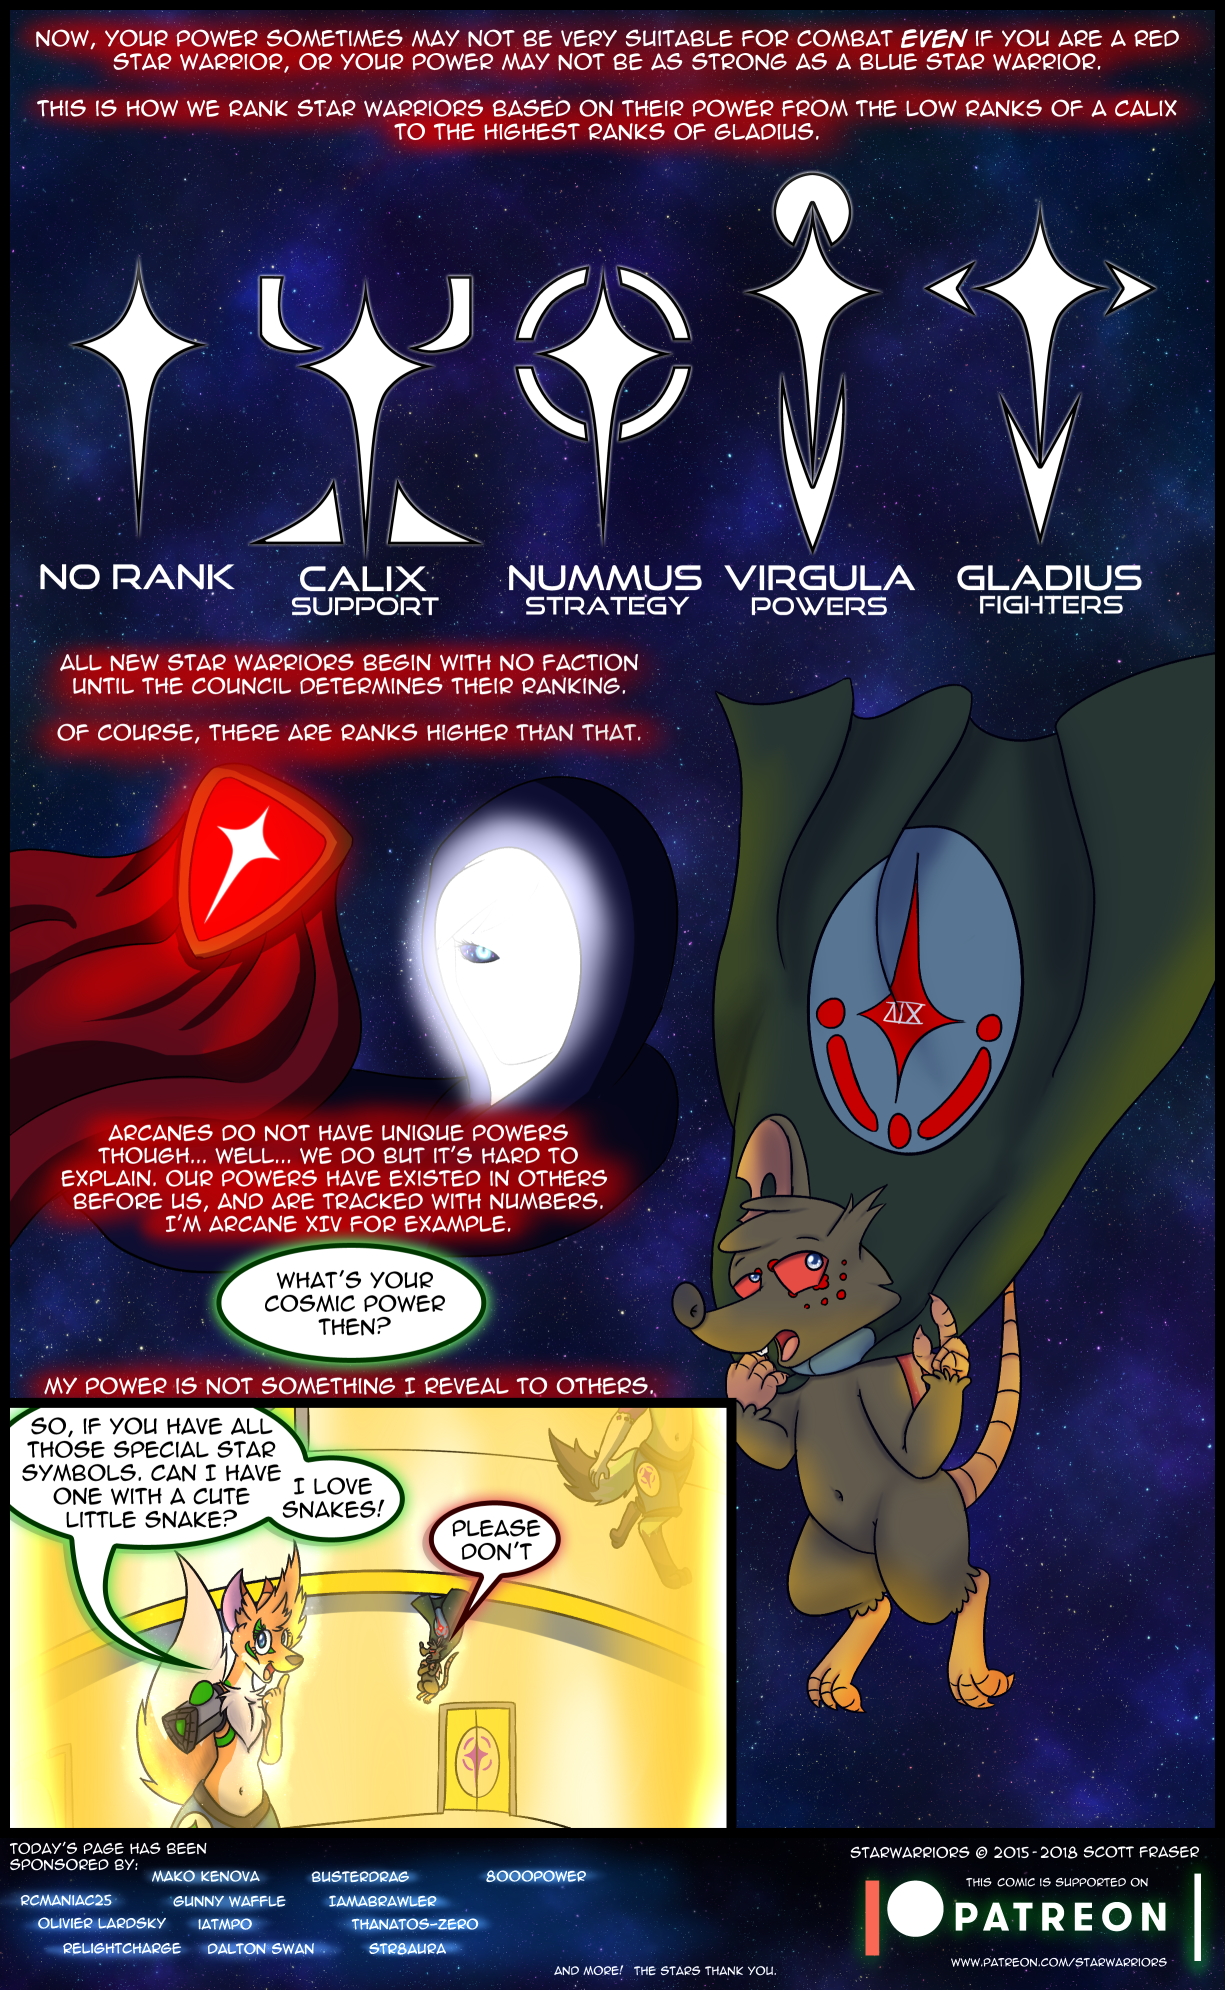 Ch4 Page 7 – Ranks